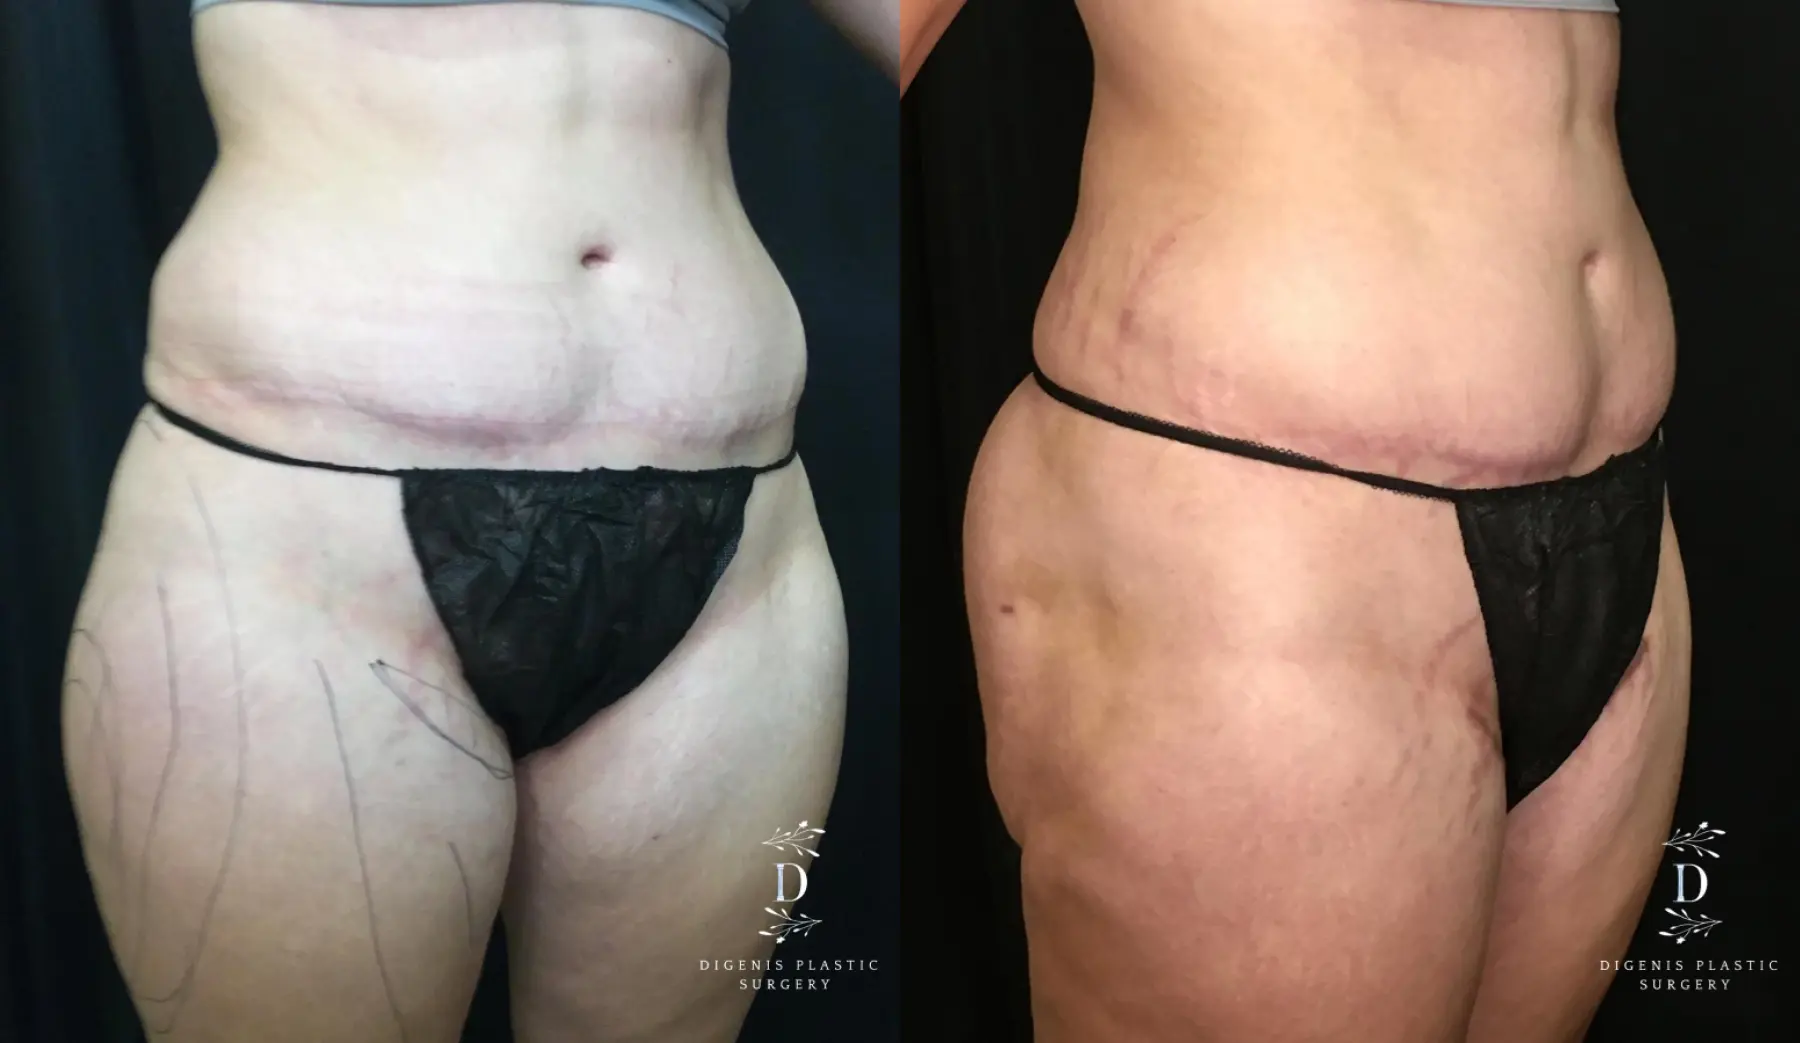 Liposuction: Patient 10 - Before and After 2